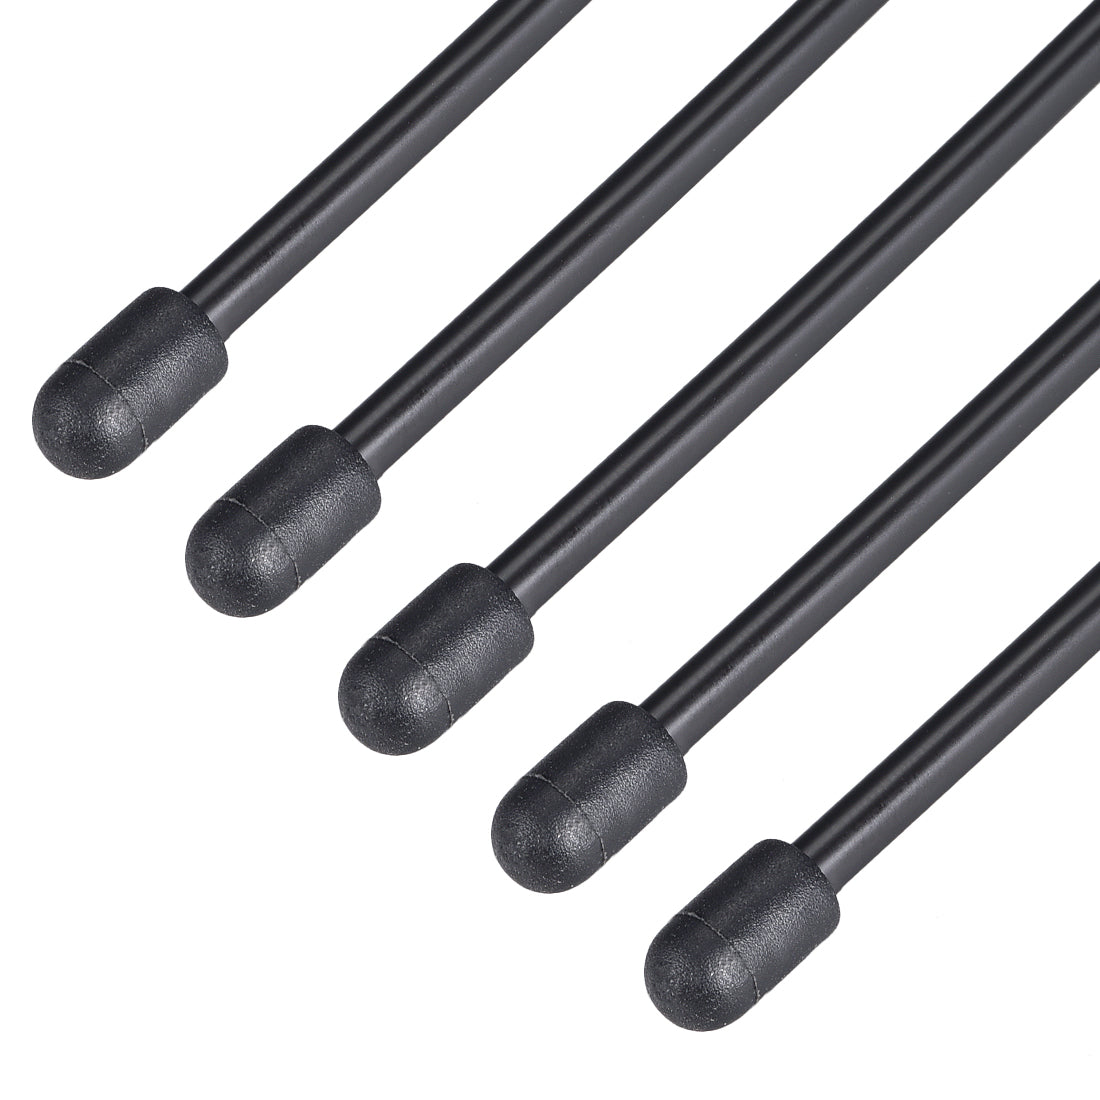 uxcell Uxcell RC Antenna Tube with Cap for RC Boat, Plastic Black 5pcs